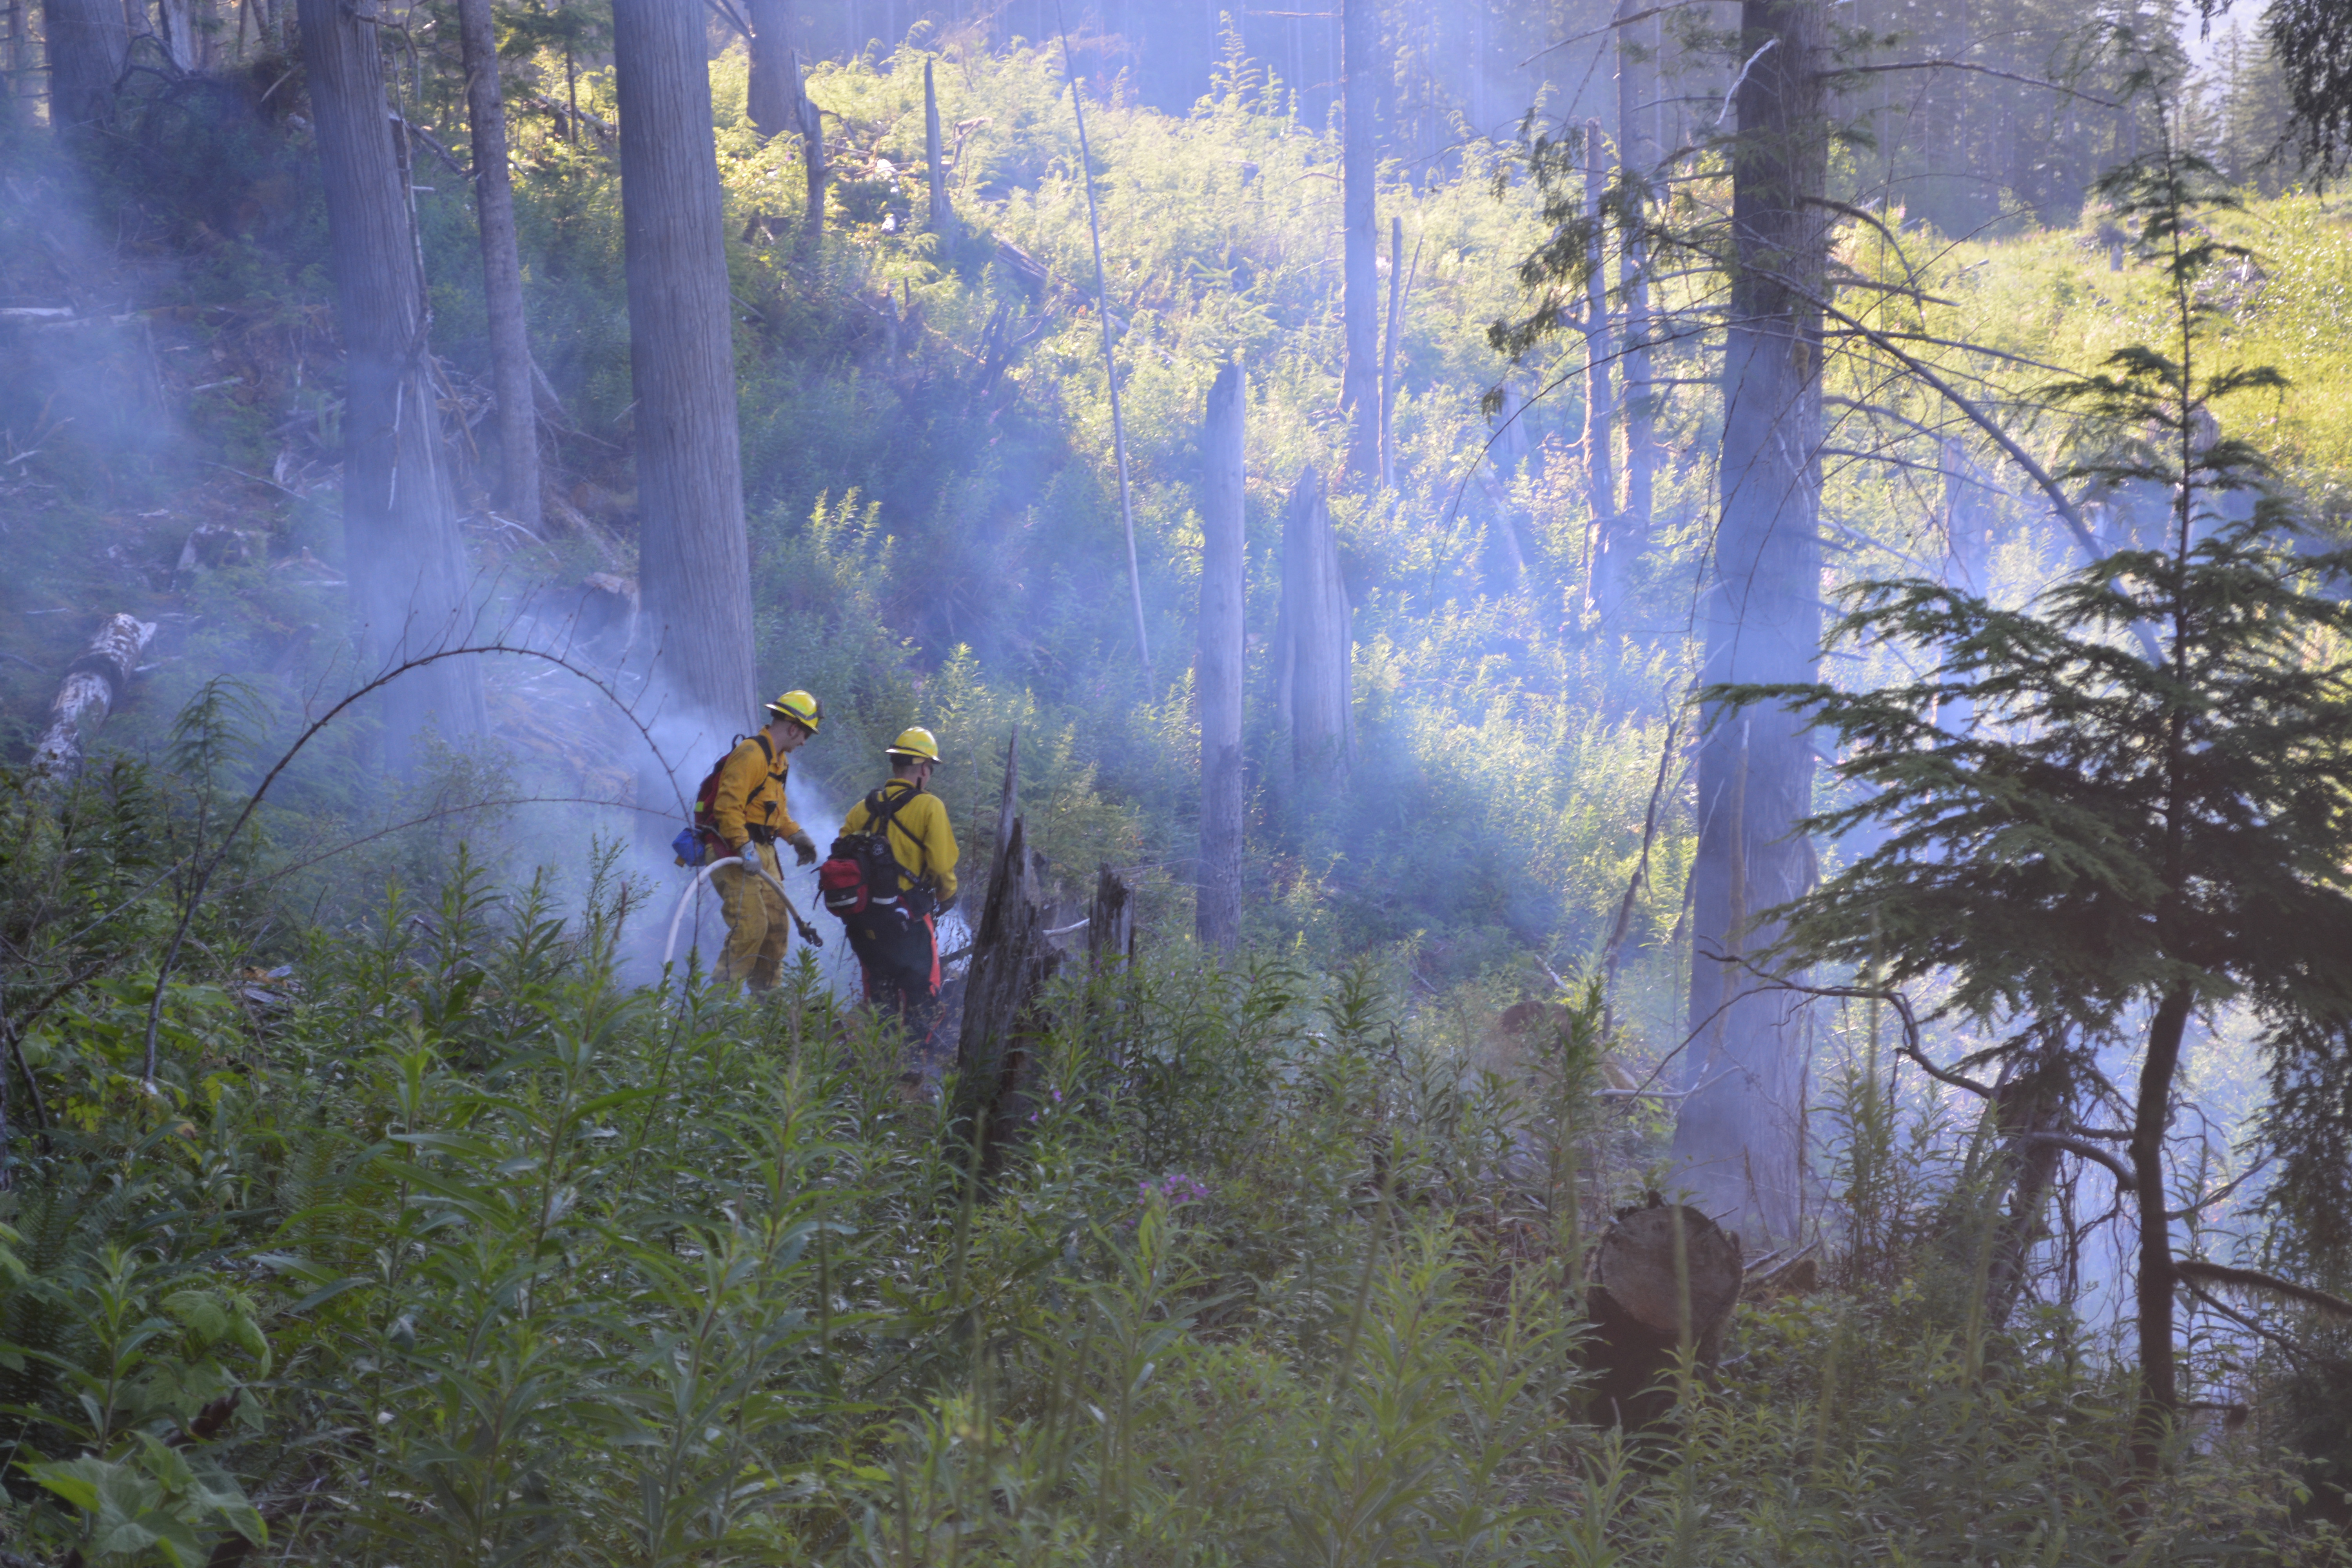 Clallam County Fire District 2 firefighters at the blaze near Lake Sutherland. Clallam County Fire District 2